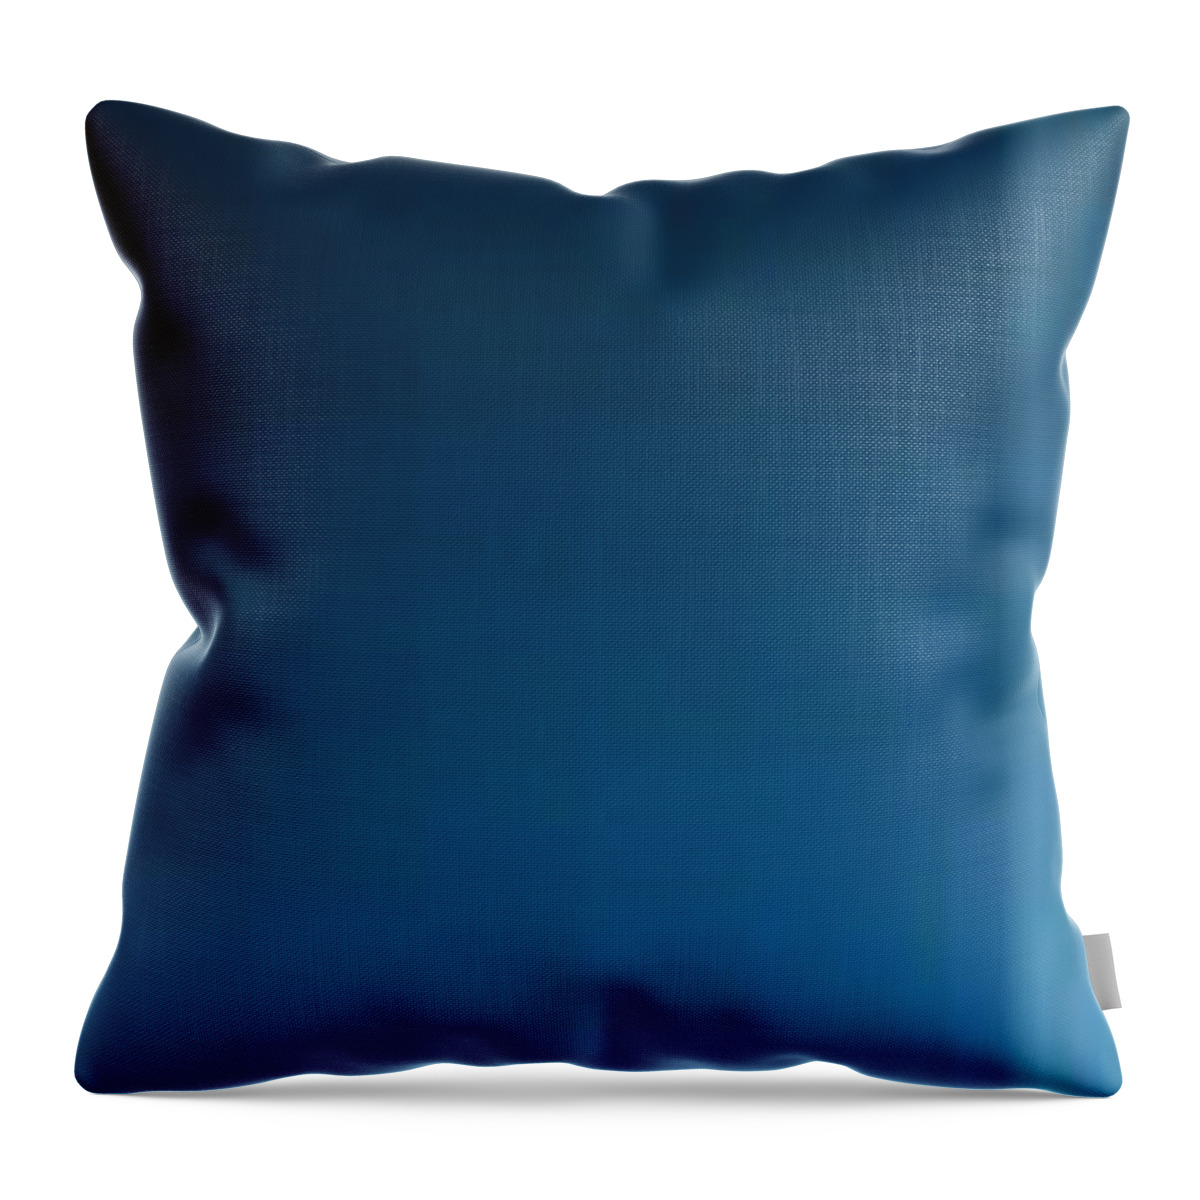 Oil Throw Pillow featuring the painting Blue Totem by Matteo TOTARO